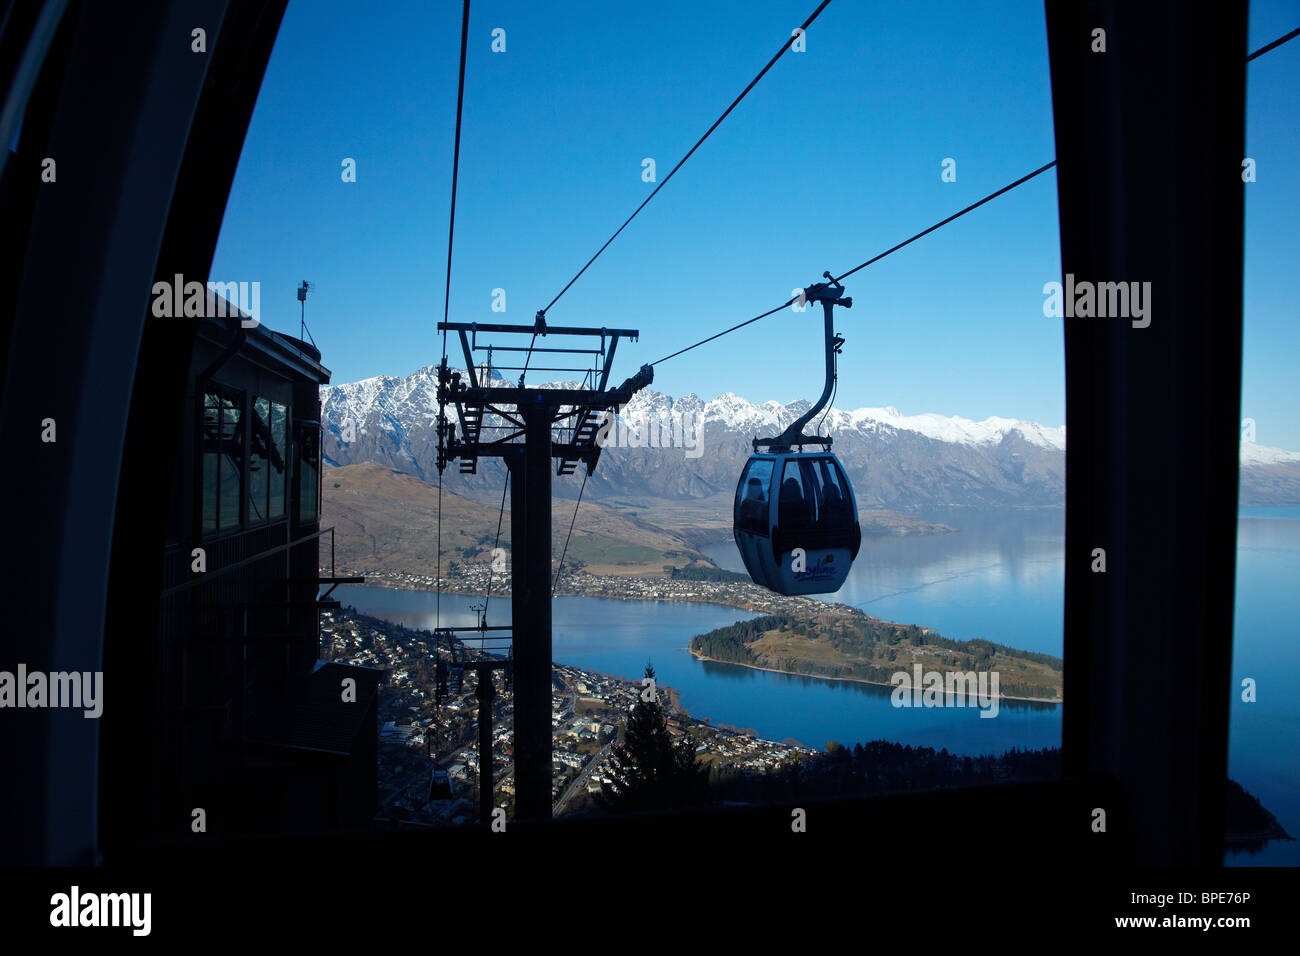 Skyline Gondola, The Remarkables and Lake Wakatipu, Queenstown, South Island, New Zealand Stock Photo